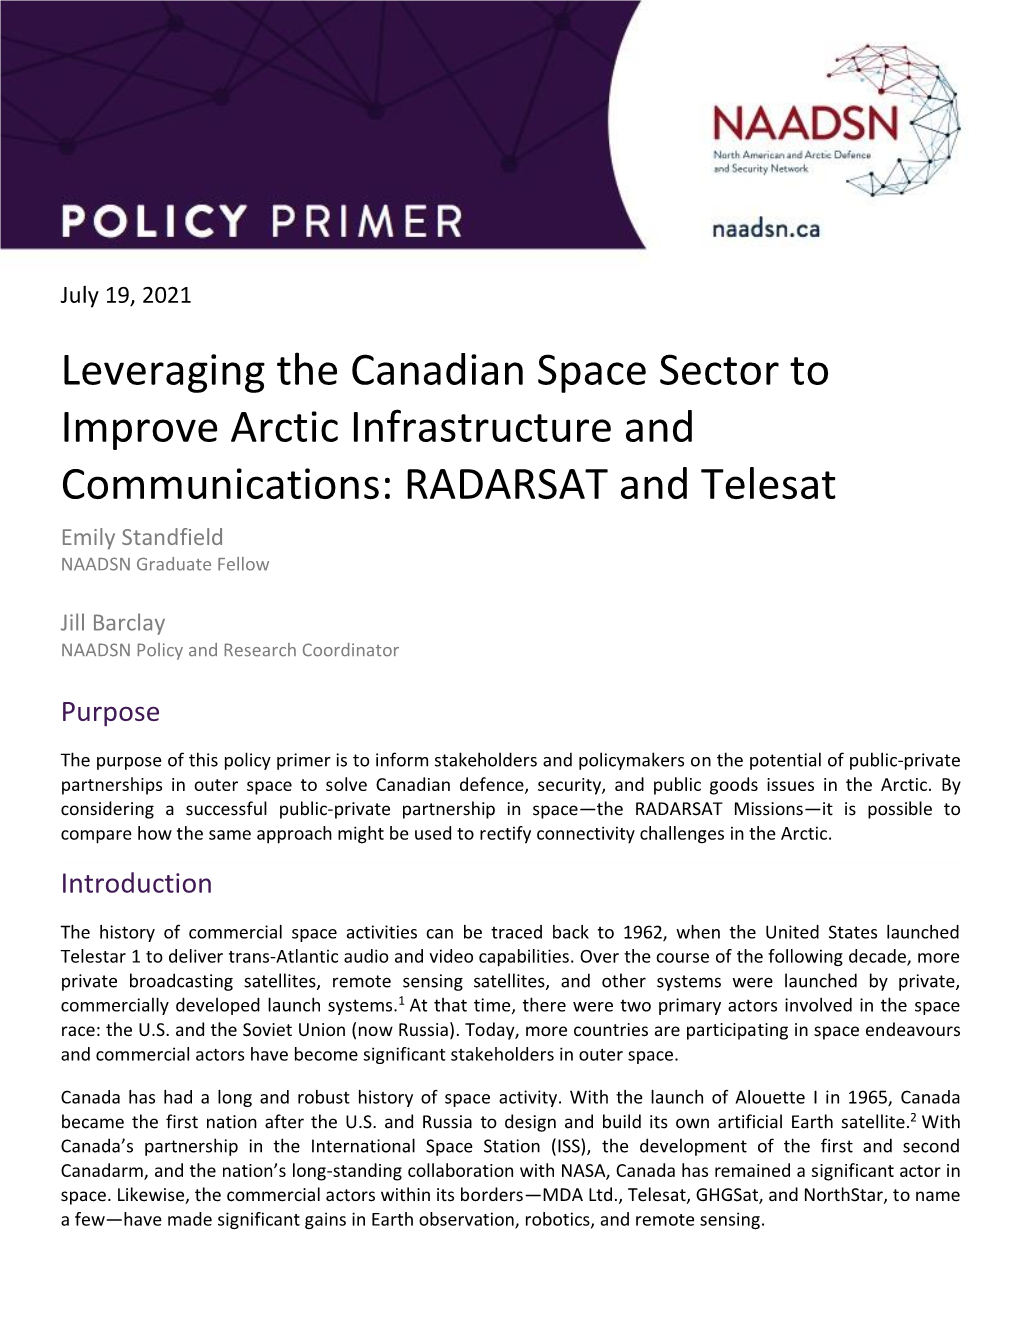 Leveraging the Canadian Space Sector to Improve Arctic Infrastructure and Communications: RADARSAT and Telesat Emily Standfield NAADSN Graduate Fellow